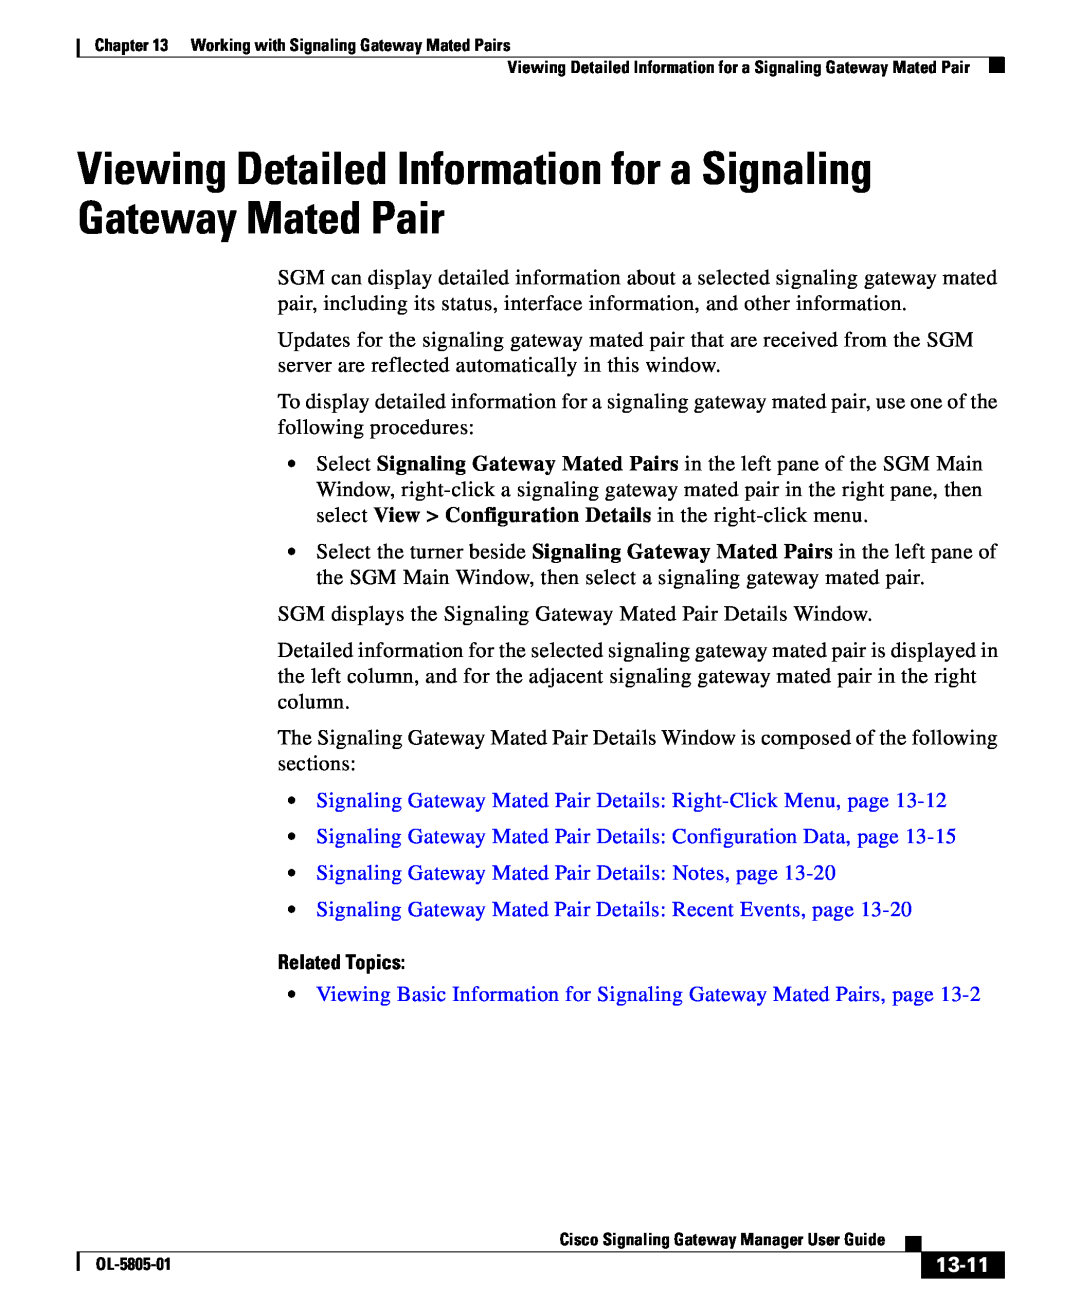 Cisco Systems OL-5805-01 manual Viewing Detailed Information for a Signaling Gateway Mated Pair, 13-11, Related Topics 